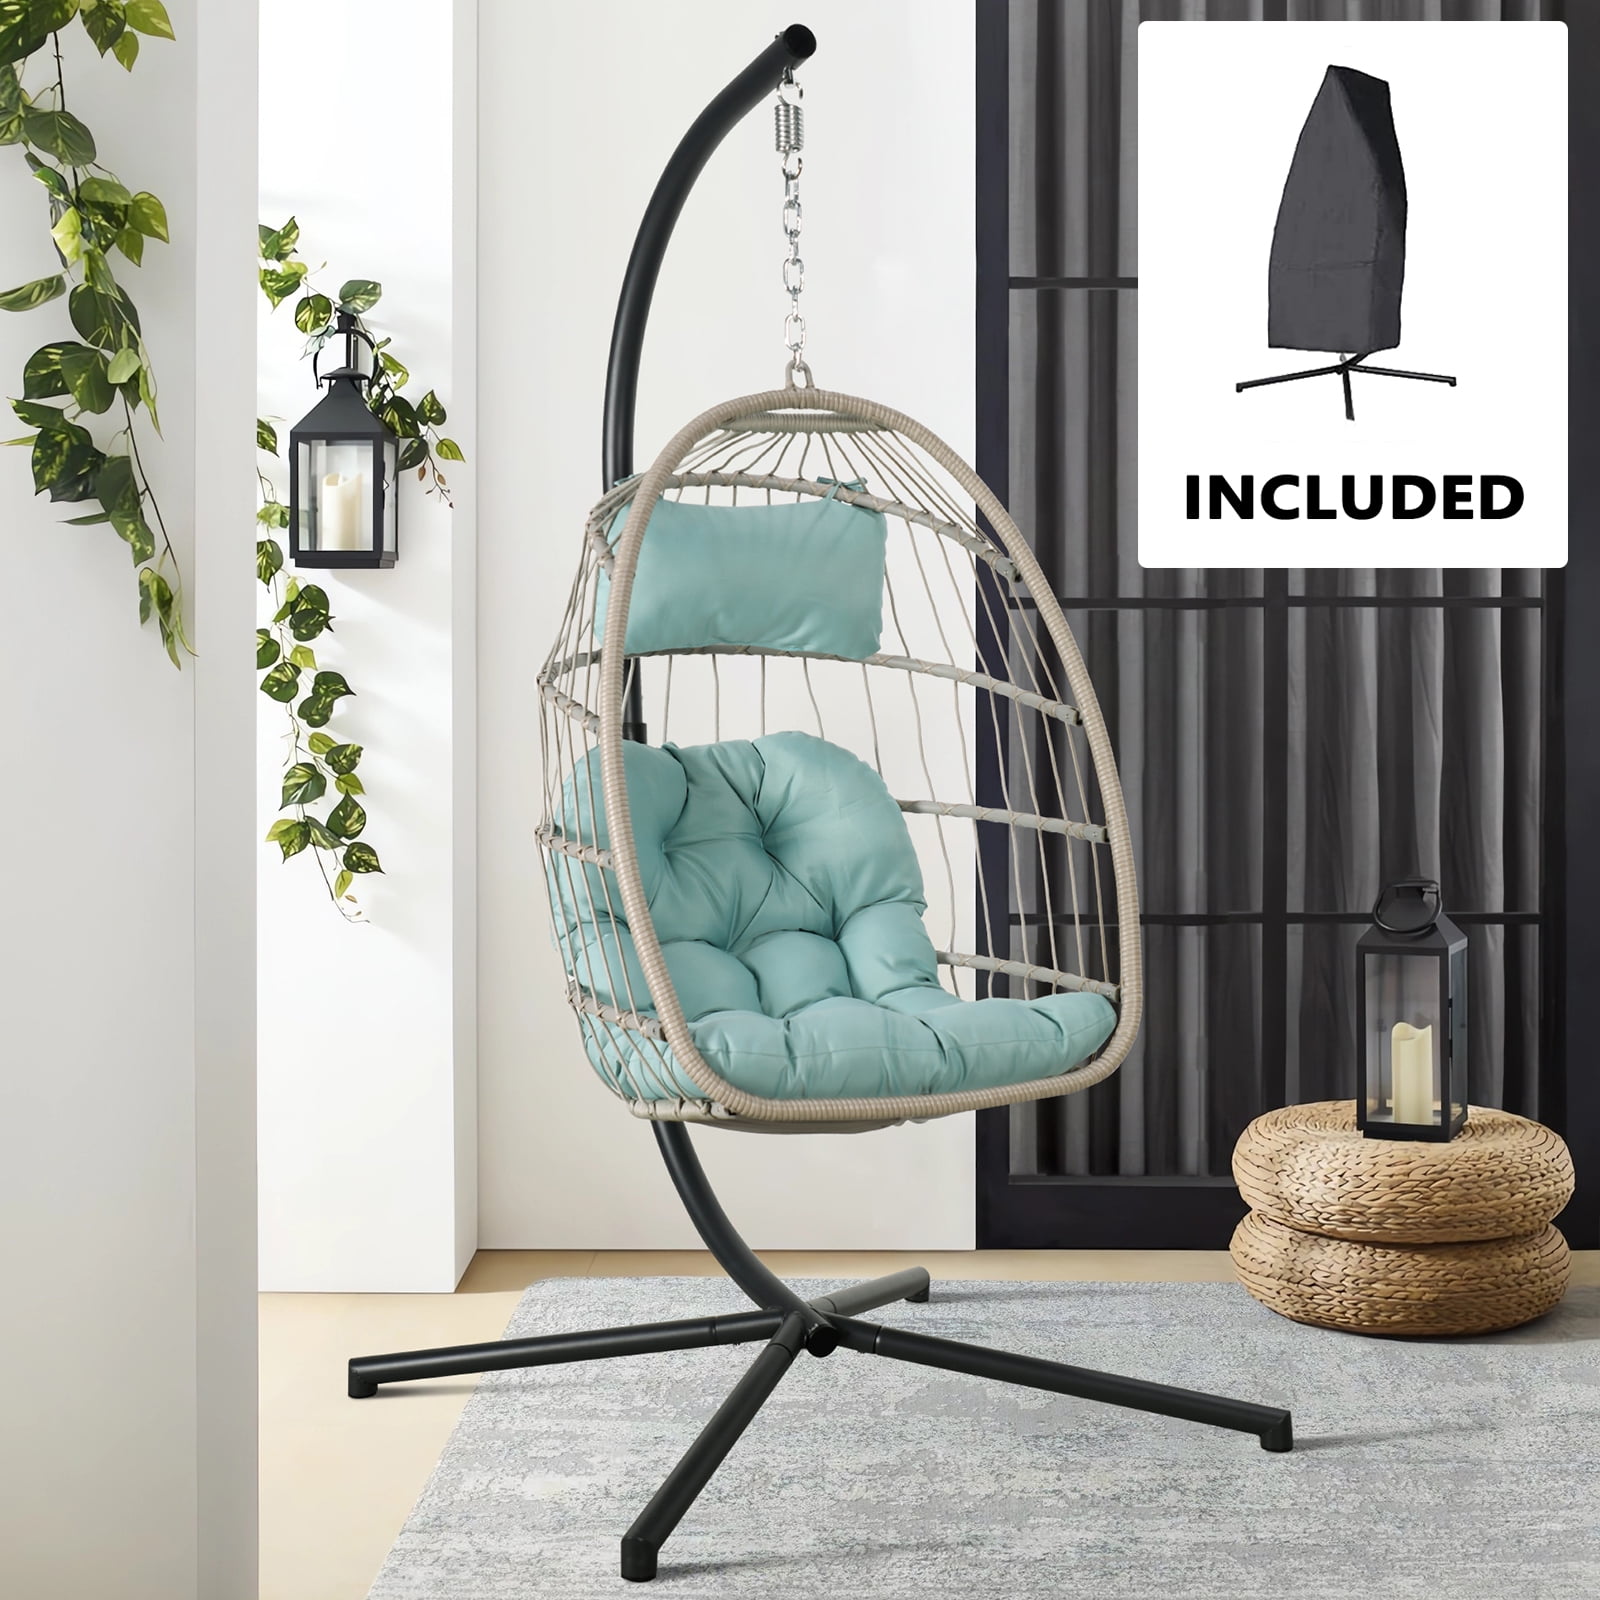 Hubert Hudson Fruitig Fabel Indoor Outdoor Swing Egg Chair with Stand, Patio Foldable Beige Wicker  Rattan Hanging Chair with Cushion, Cover, All Weather Hammock Chair for  Bedroom, Garden, Blue - Walmart.com